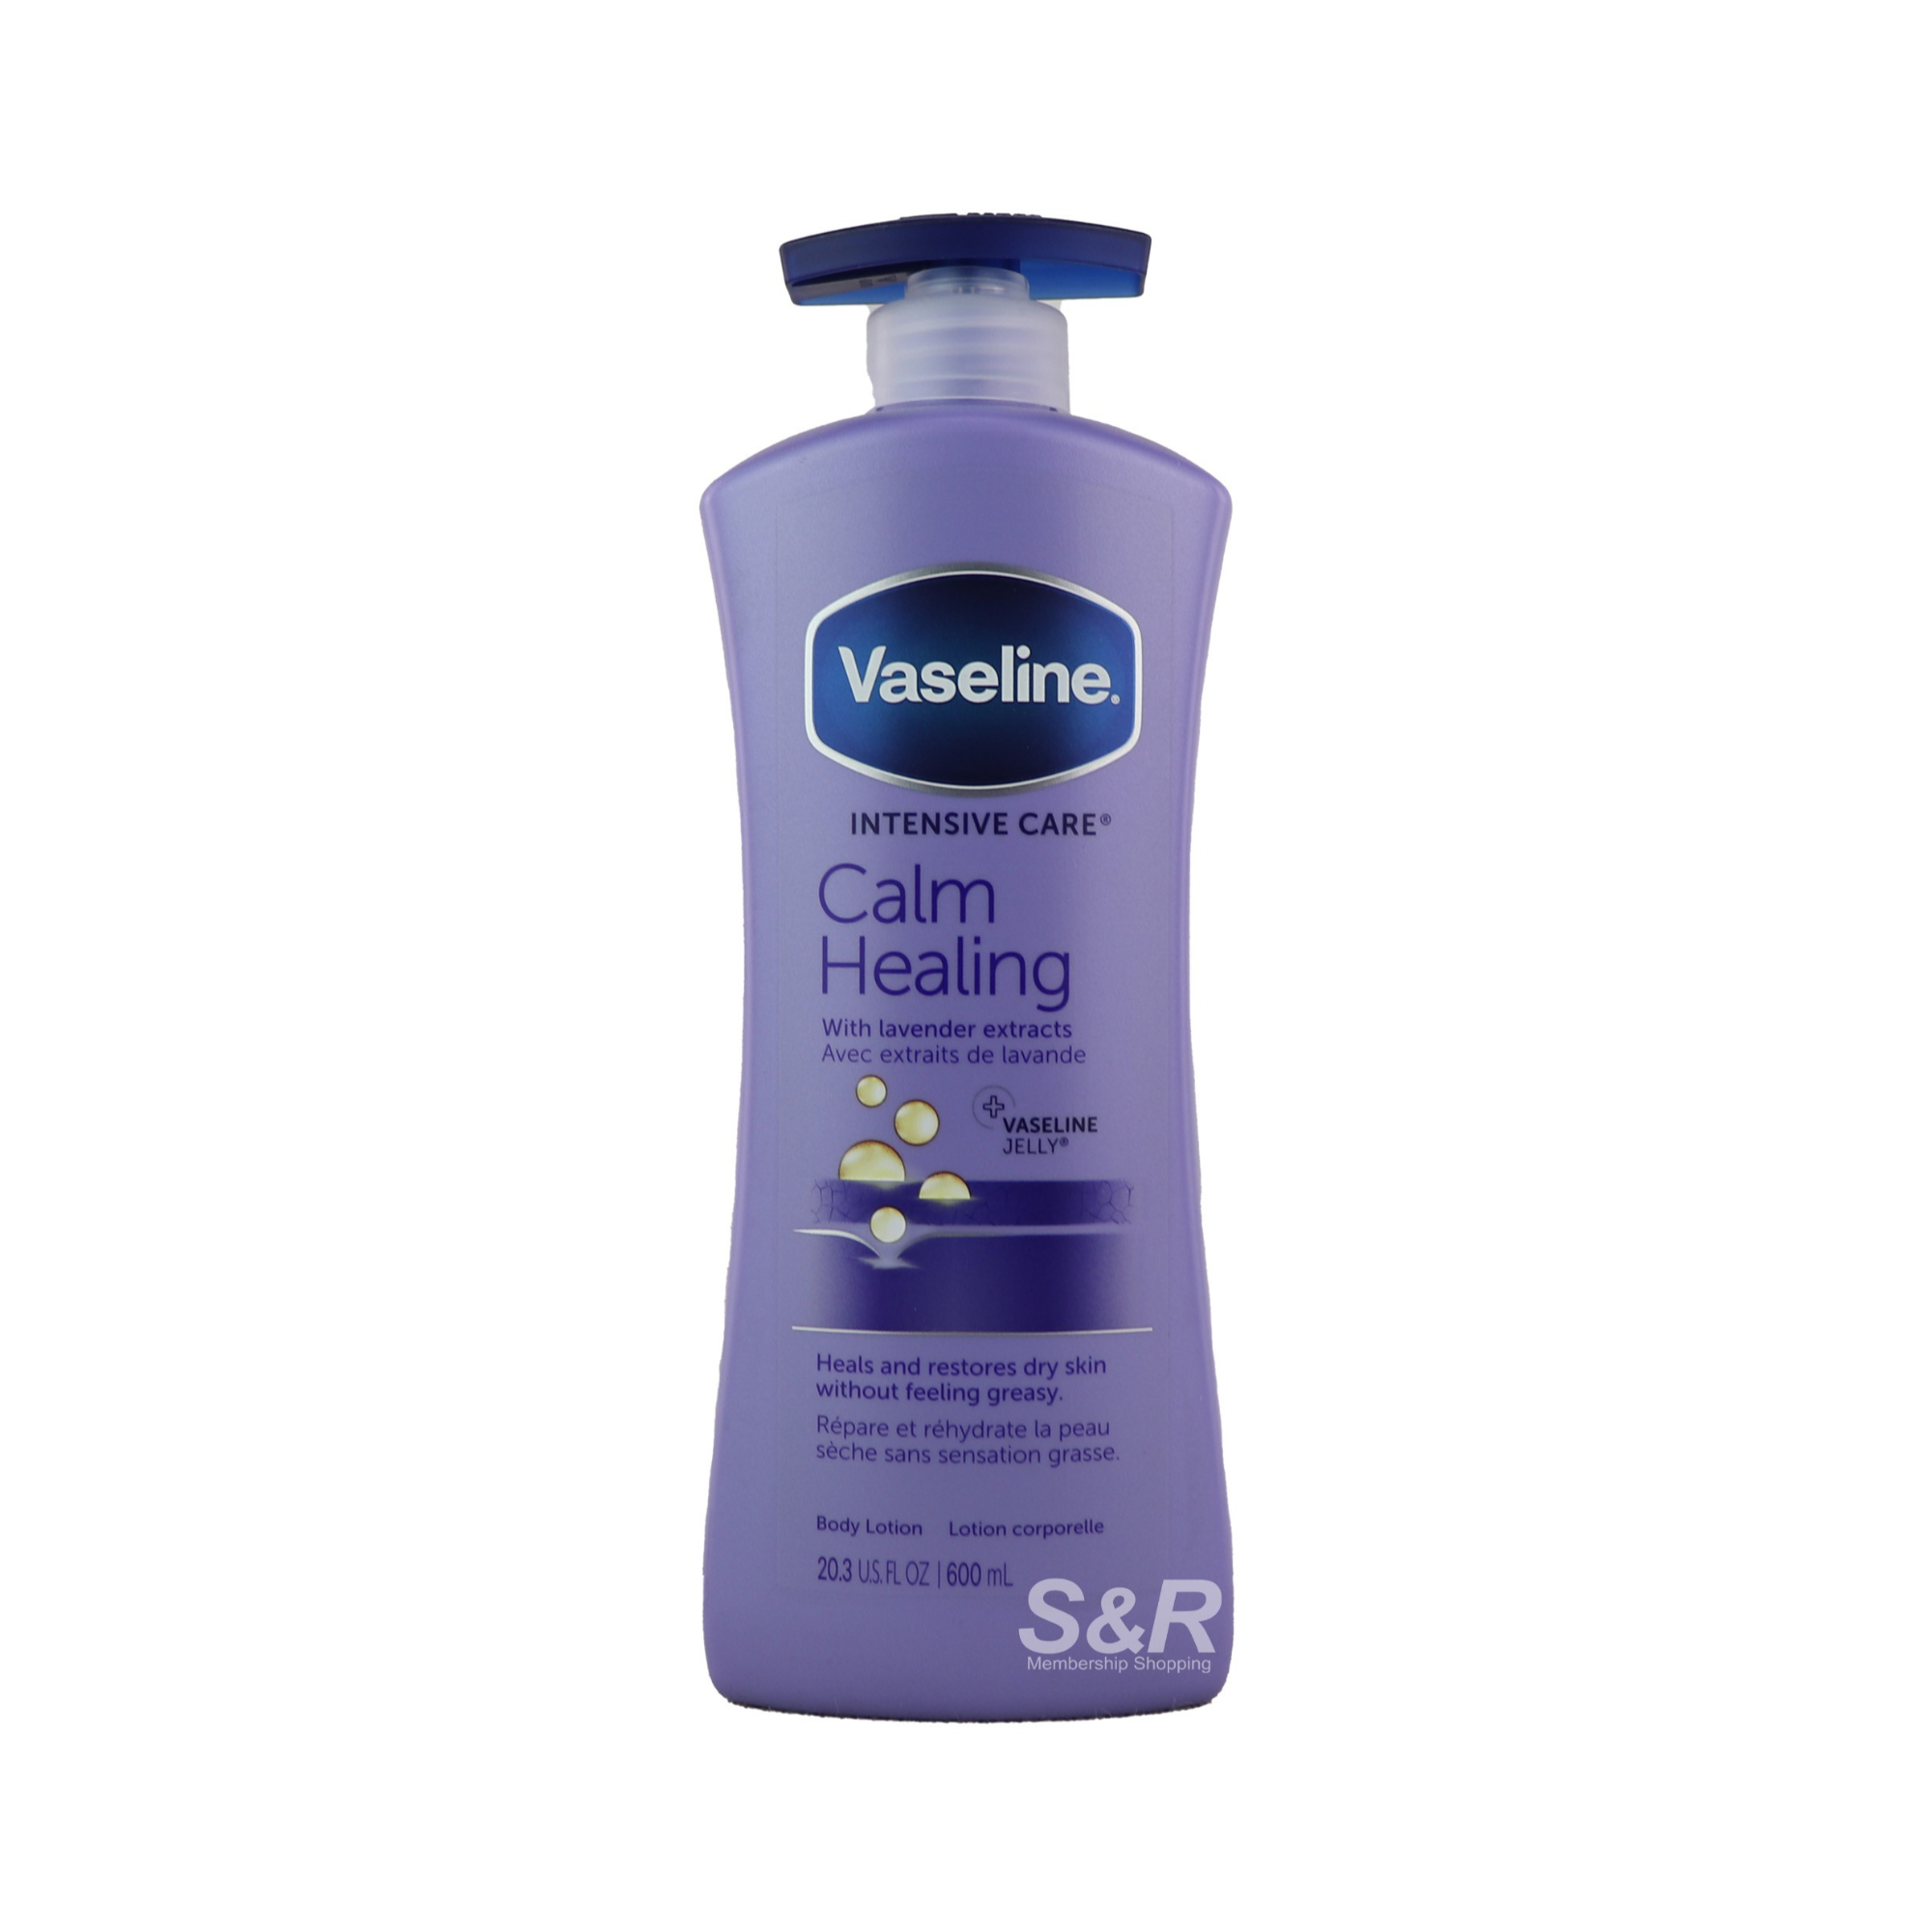 Vaseline Intensive Care Calm Healing Body Lotion 600mL